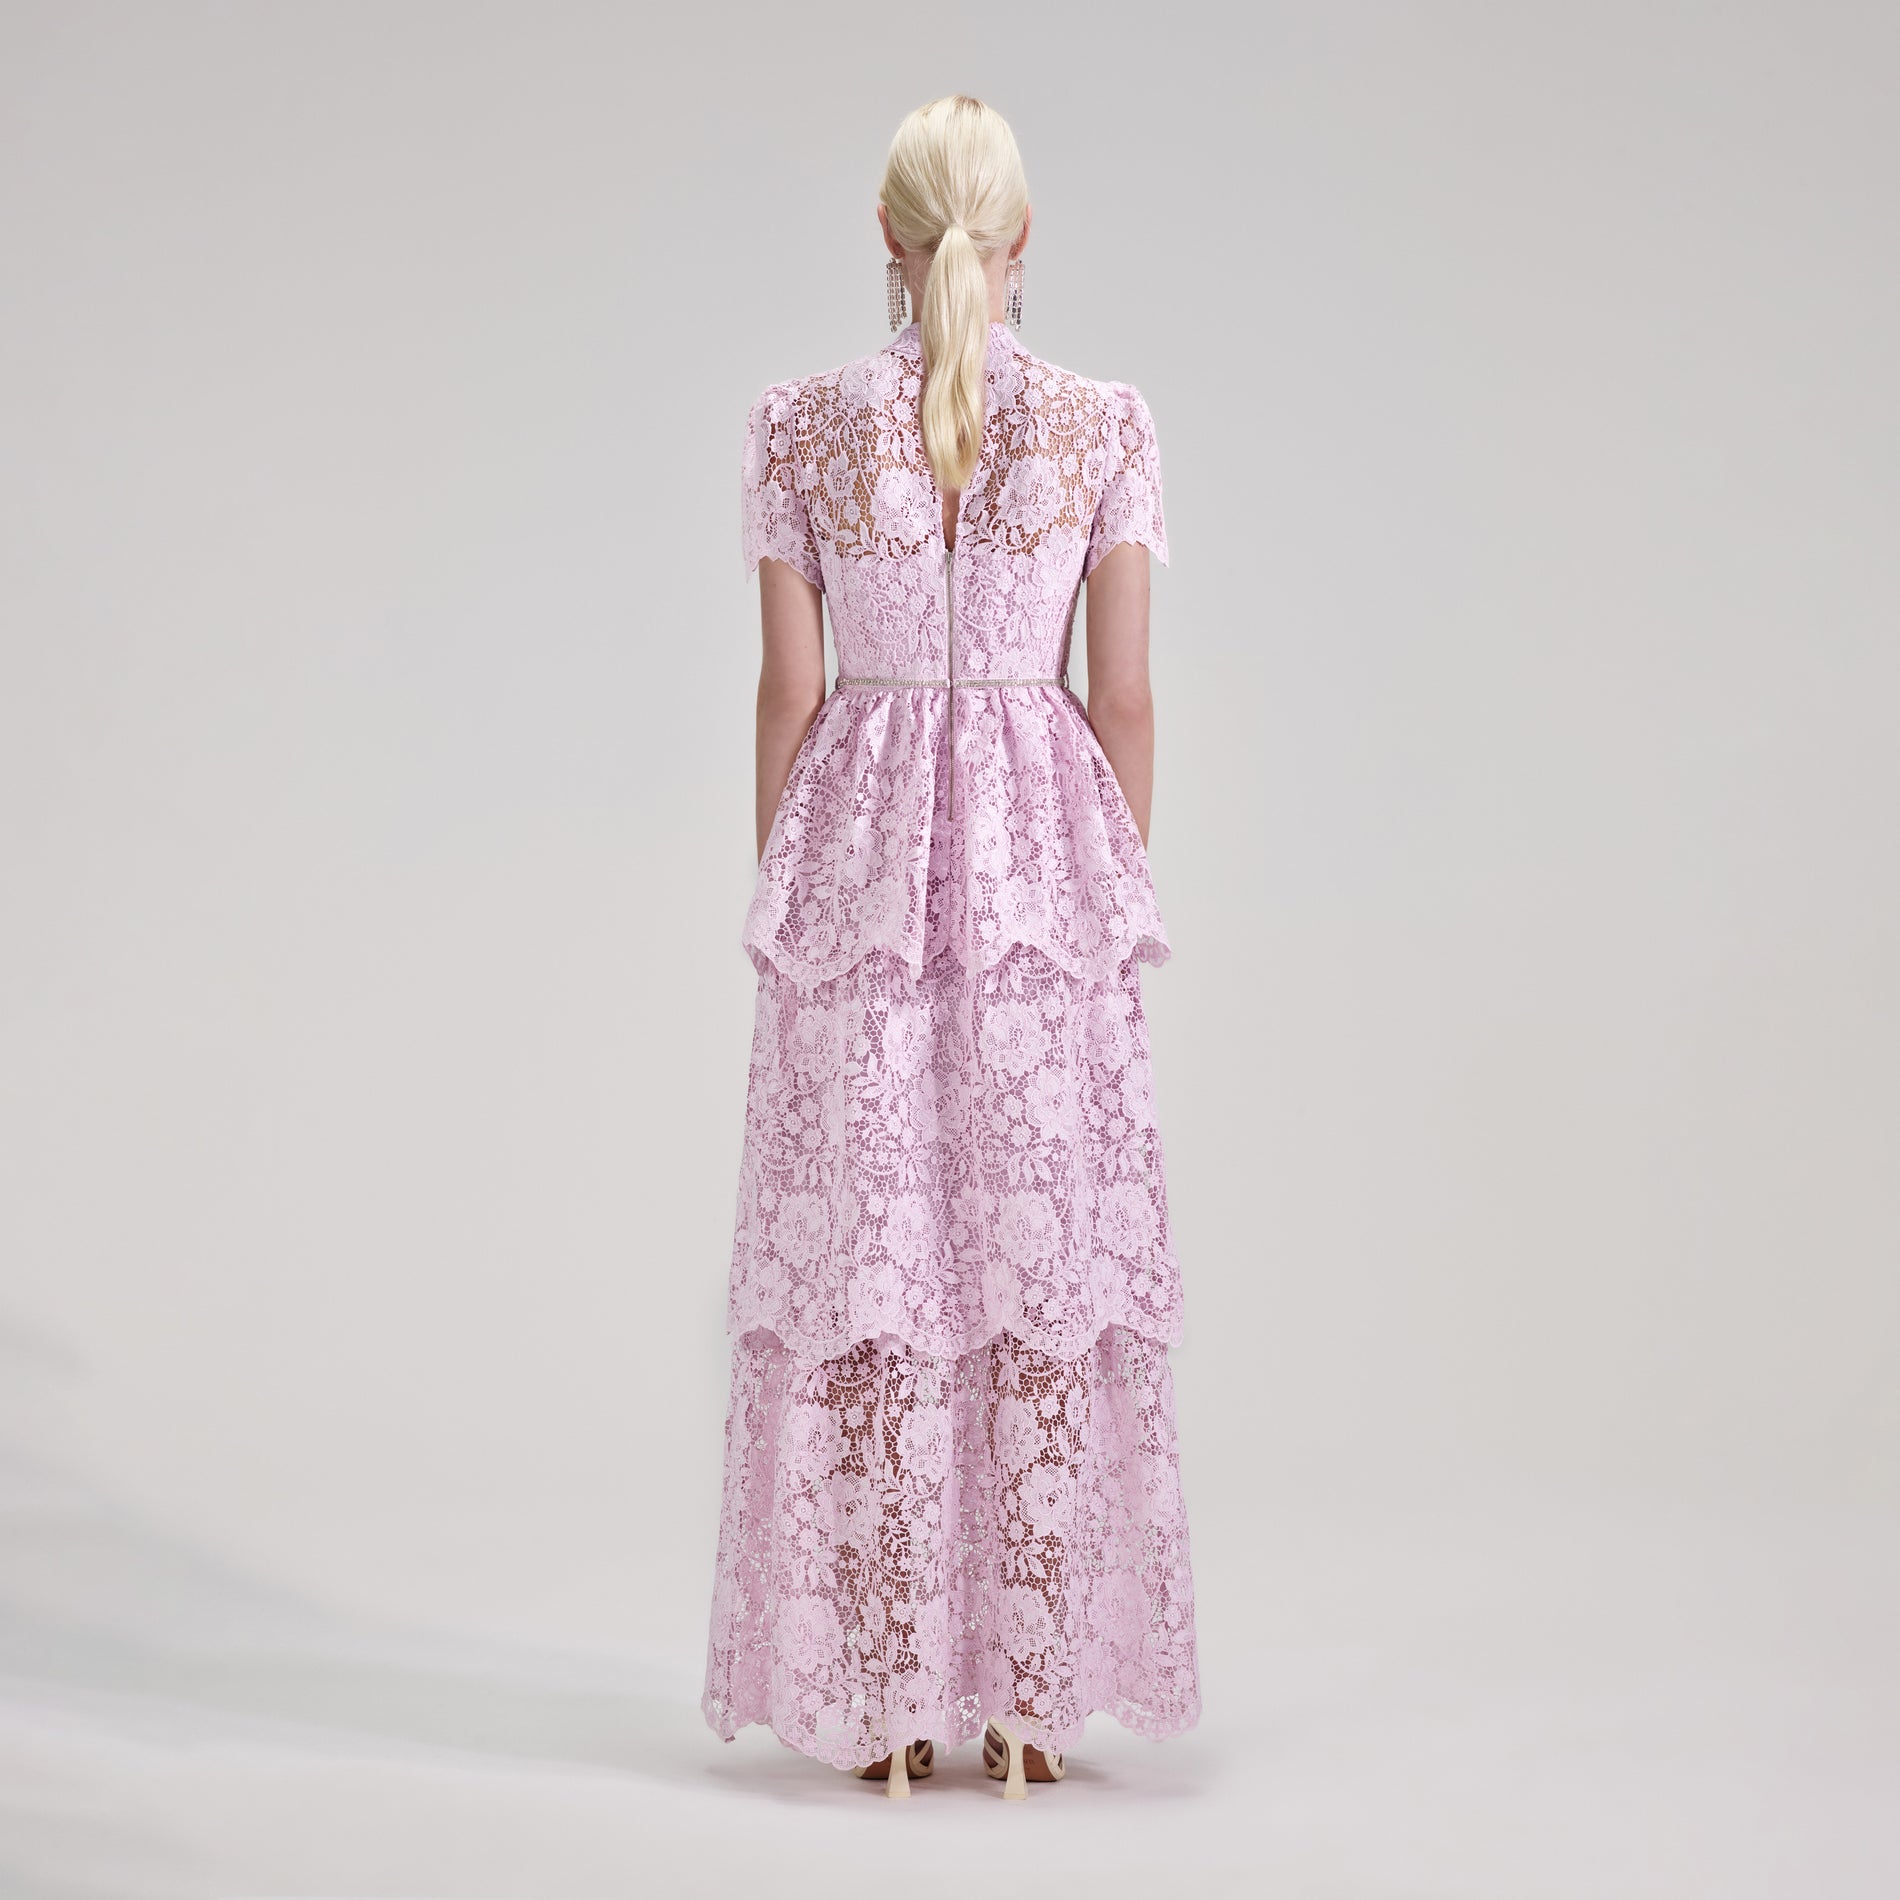 A woman wearing the Pink Cord Lace Tiered Maxi Dress